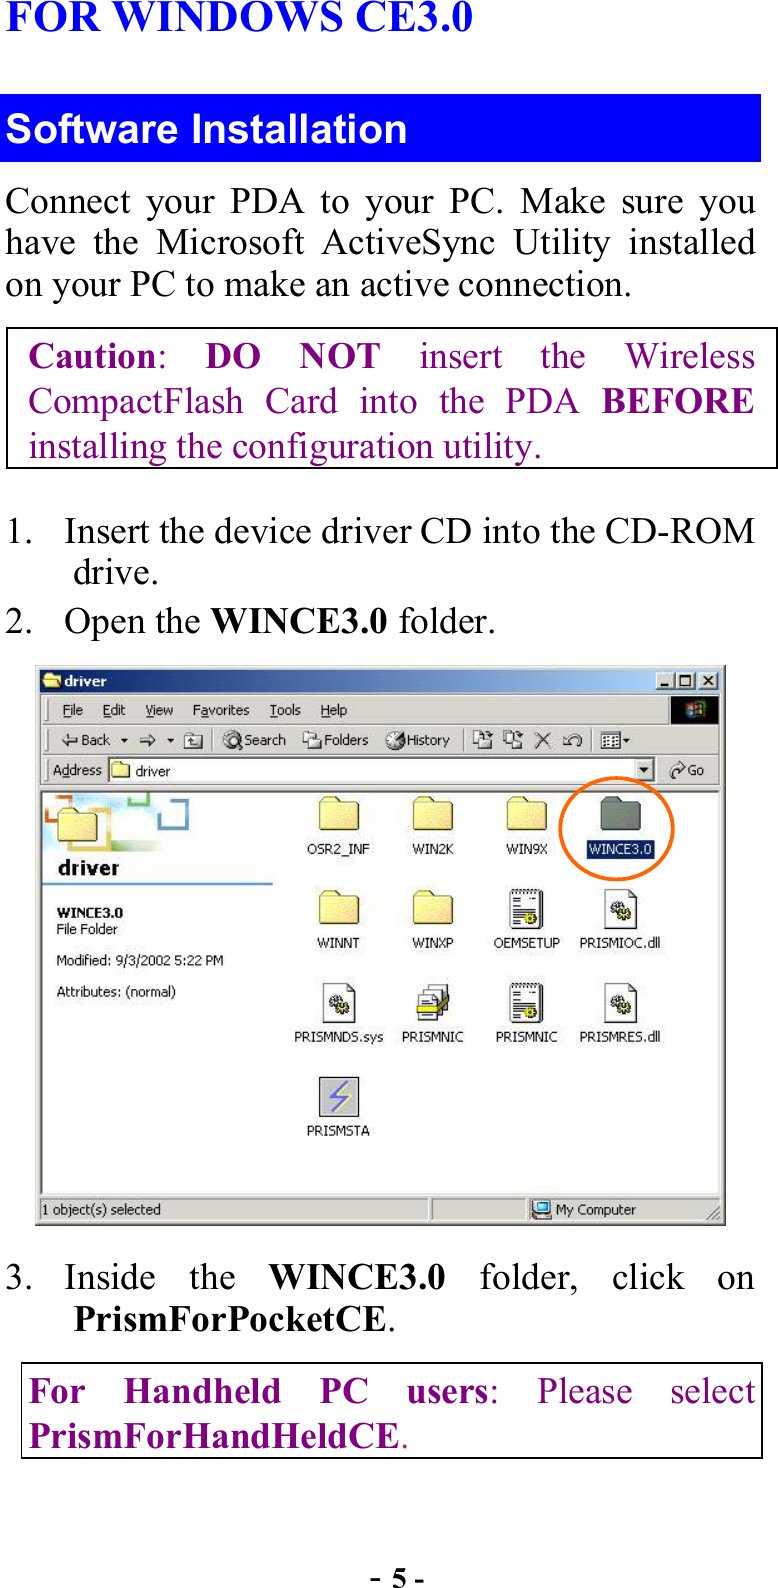  - 5 - FOR WINDOWS CE3.0 Software Installation Connect your PDA to your PC. Make sure you have the Microsoft ActiveSync Utility installed on your PC to make an active connection. Caution:  DO NOT insert the Wireless CompactFlash Card into the PDA BEFORE installing the configuration utility. 1.  Insert the device driver CD into the CD-ROM drive. 2. Open the WINCE3.0 folder.  3. Inside the WINCE3.0 folder, click on PrismForPocketCE.  For Handheld PC users: Please select PrismForHandHeldCE.   